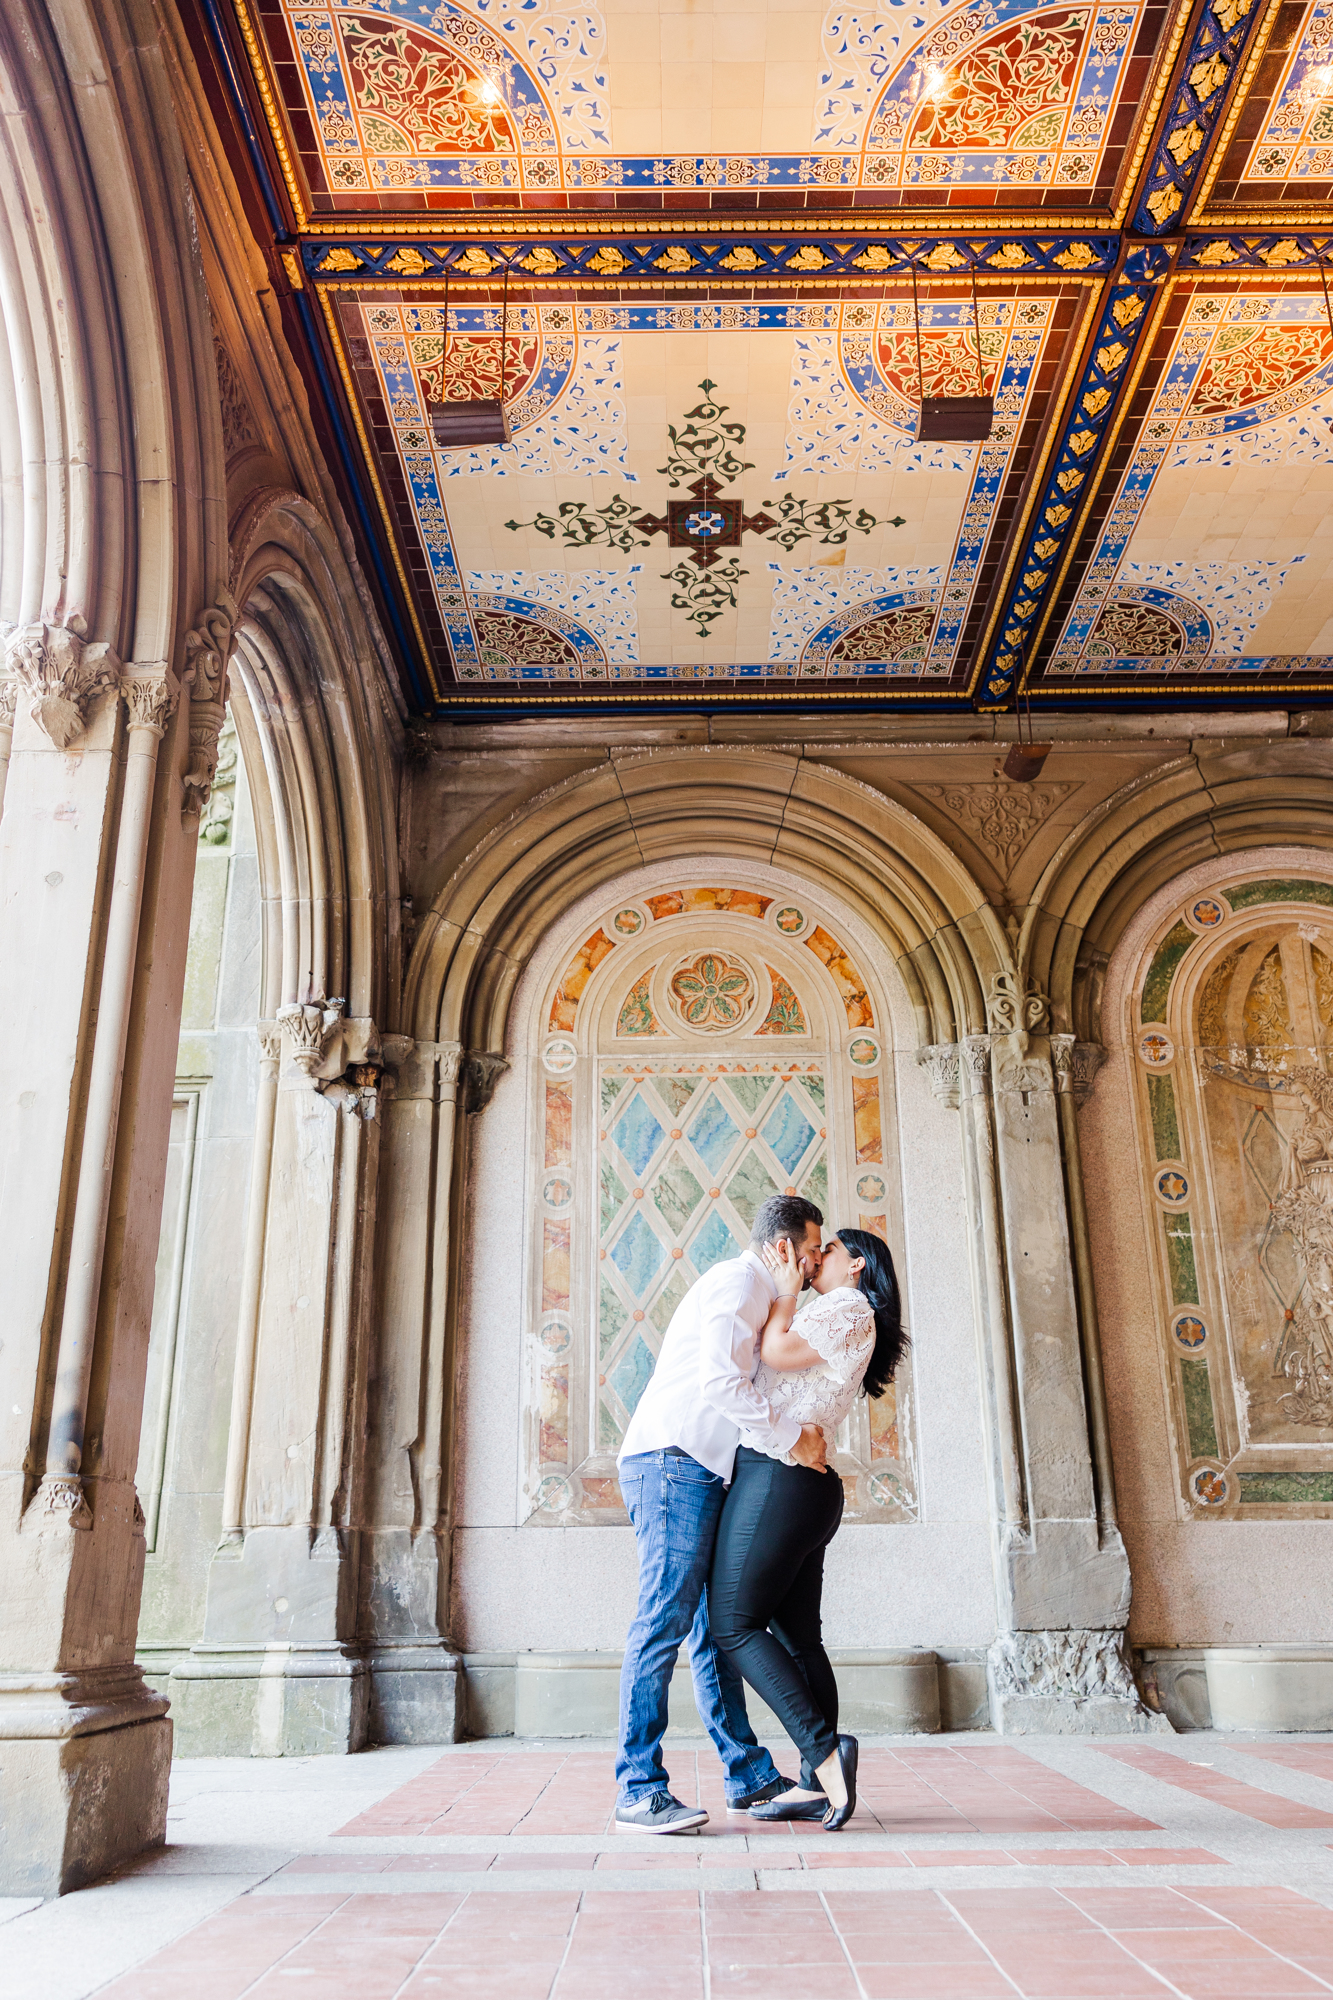 Cheerful Central Park Engagement Photos in New York